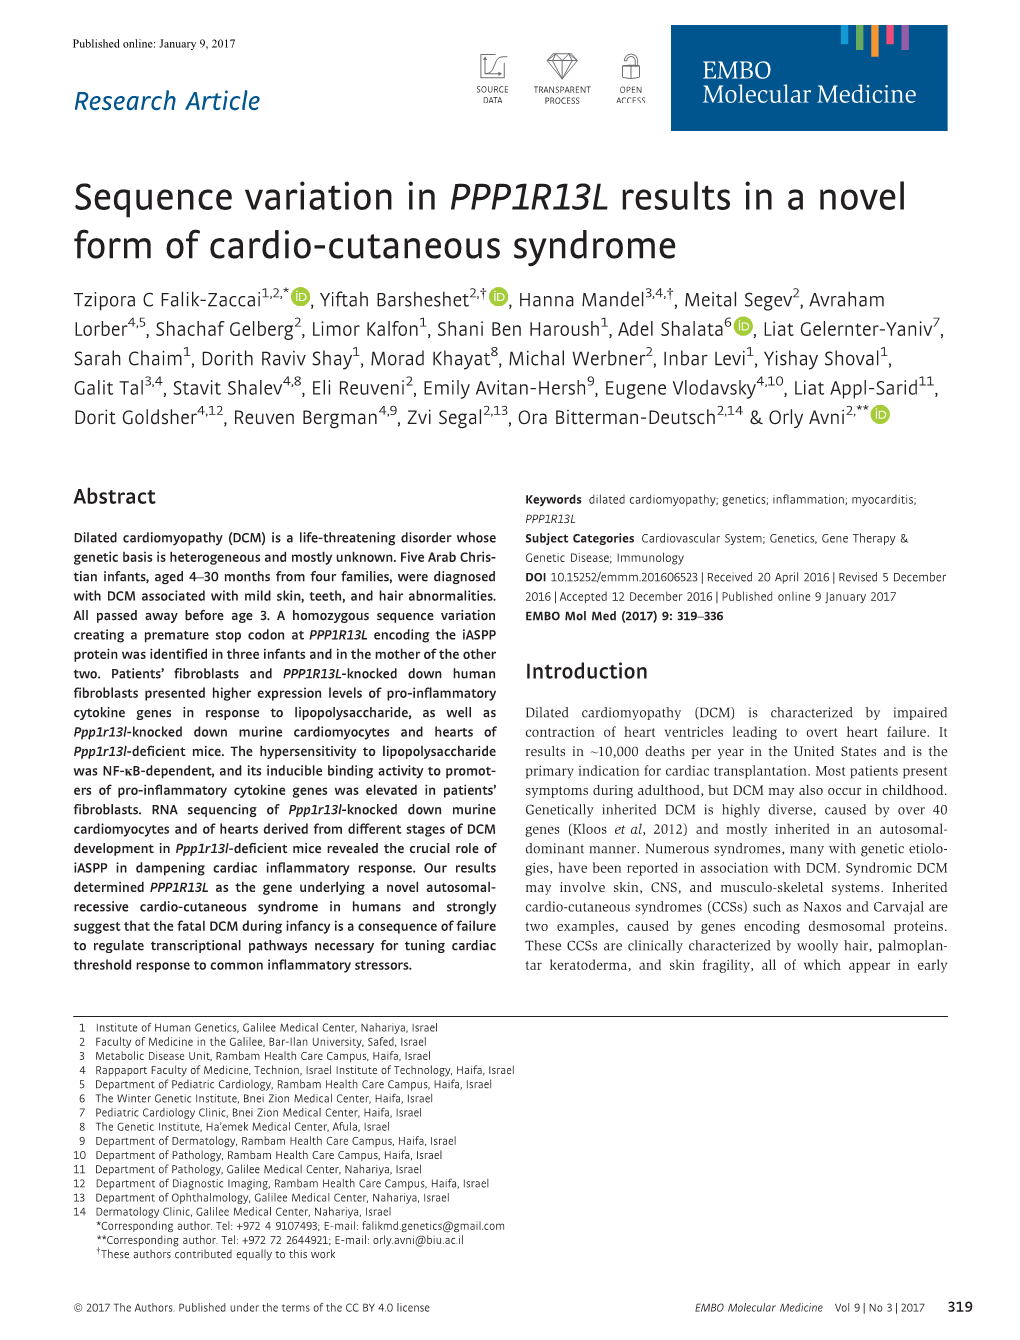 Sequence Variation in PPP1R13L Results in a Novel Form of Cardio&